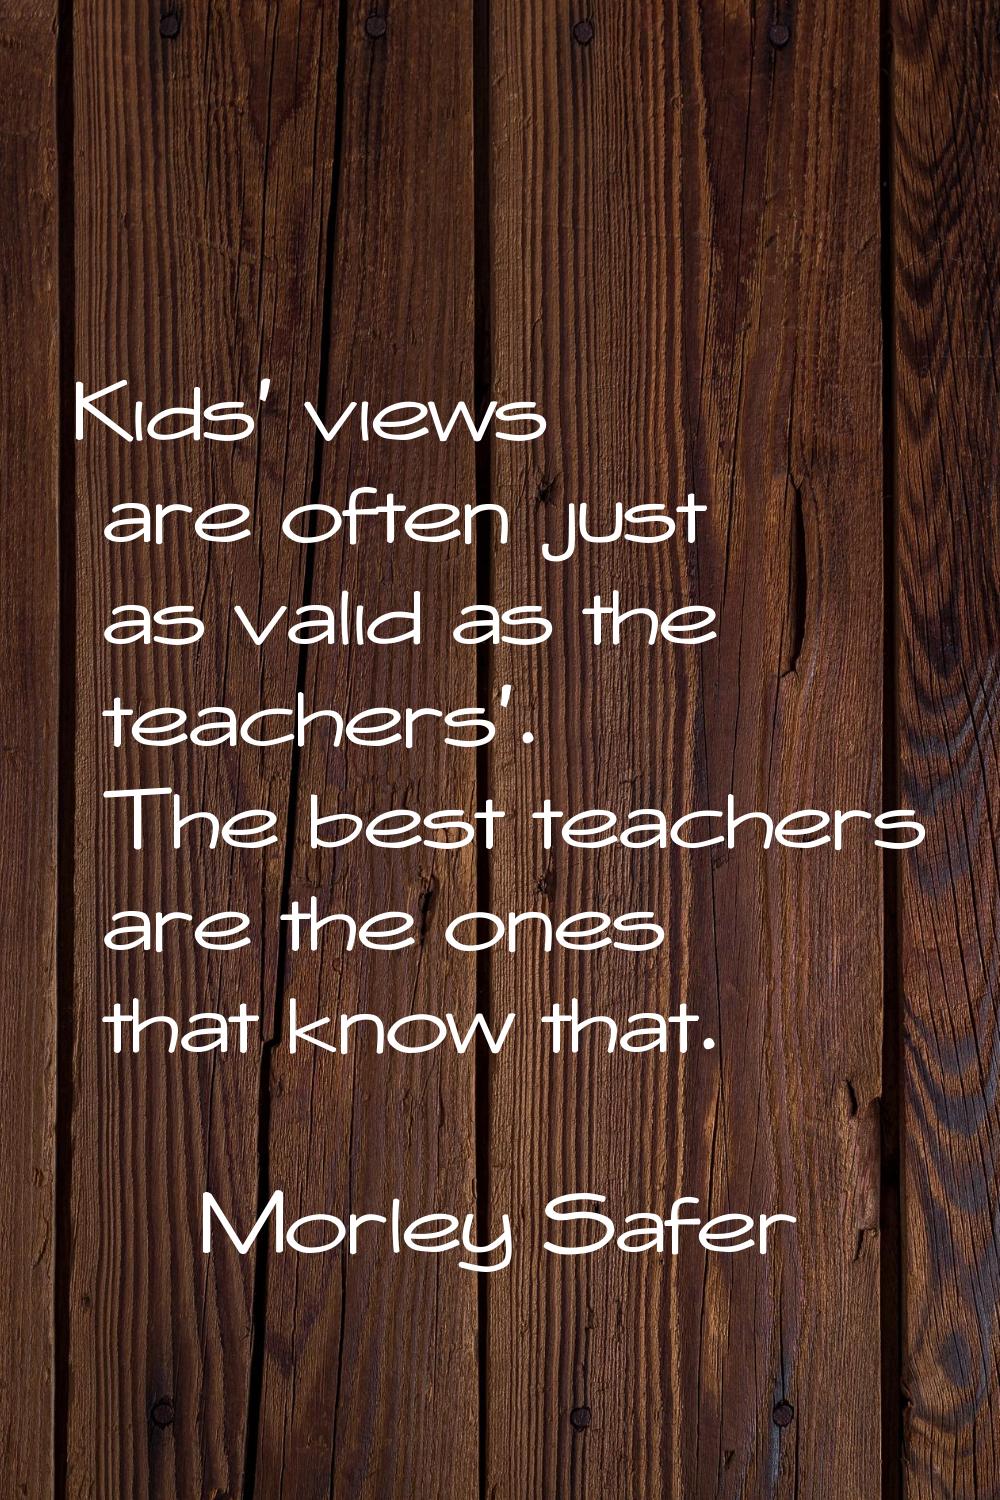 Kids' views are often just as valid as the teachers'. The best teachers are the ones that know that